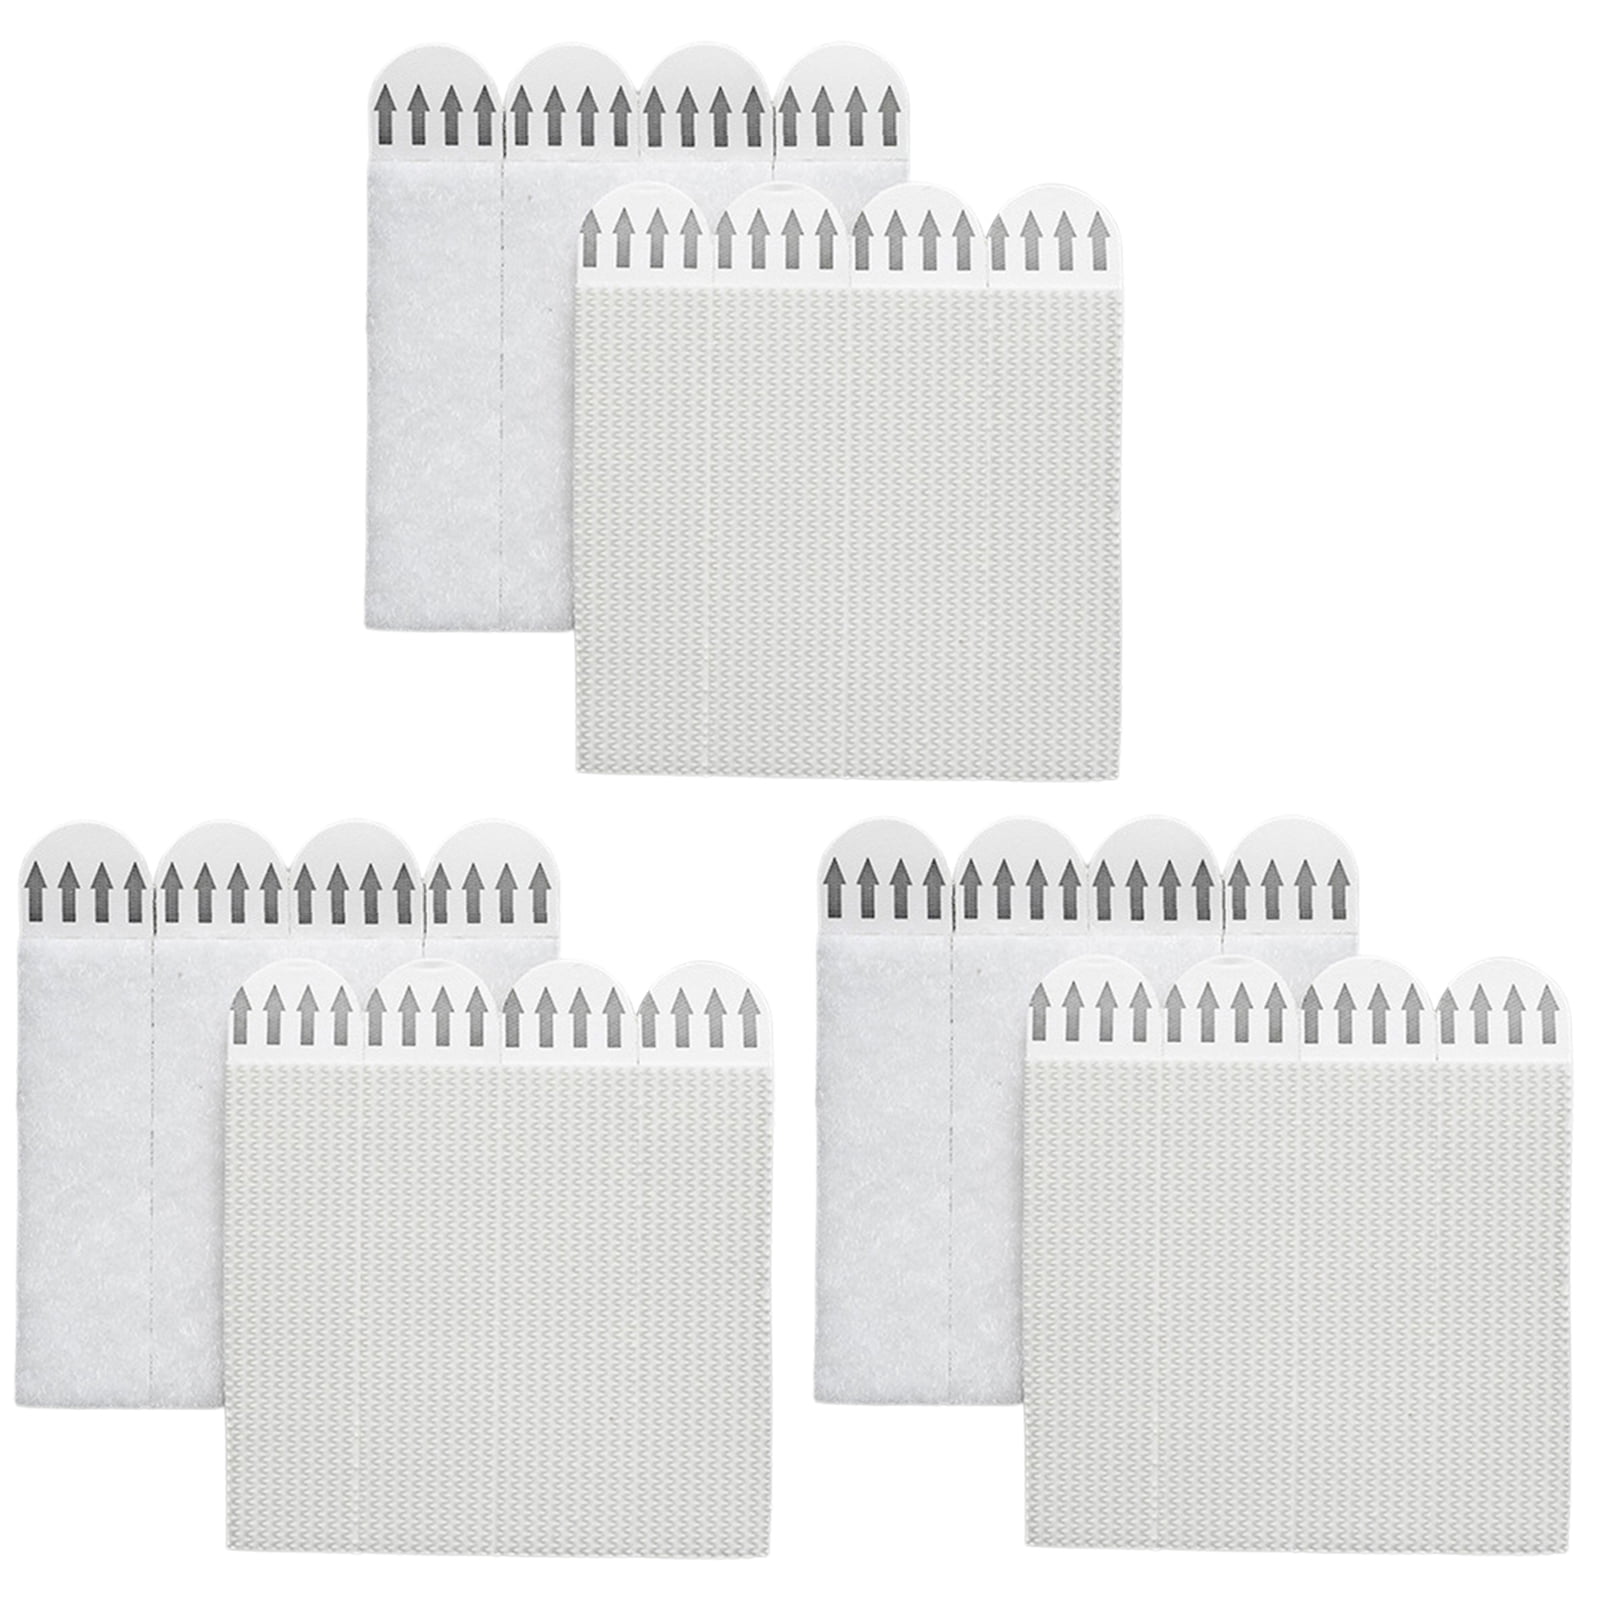 Command Poster Strips, White, Damage-Free Hanging, 48 Command Strips 